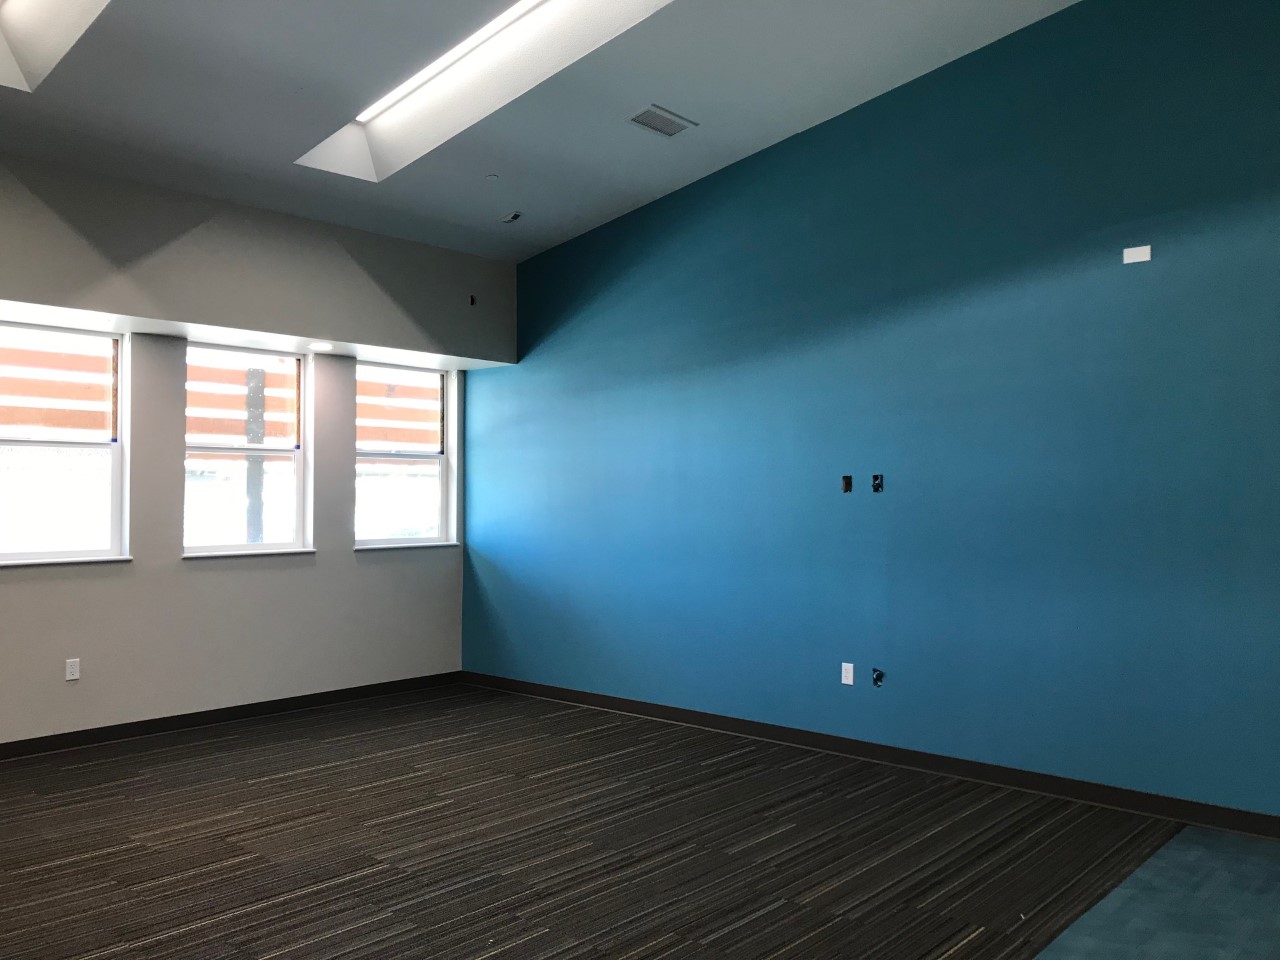 Photo of a room showing the bold blue paint used in the St. Rest Baptist Church Classroom Building.